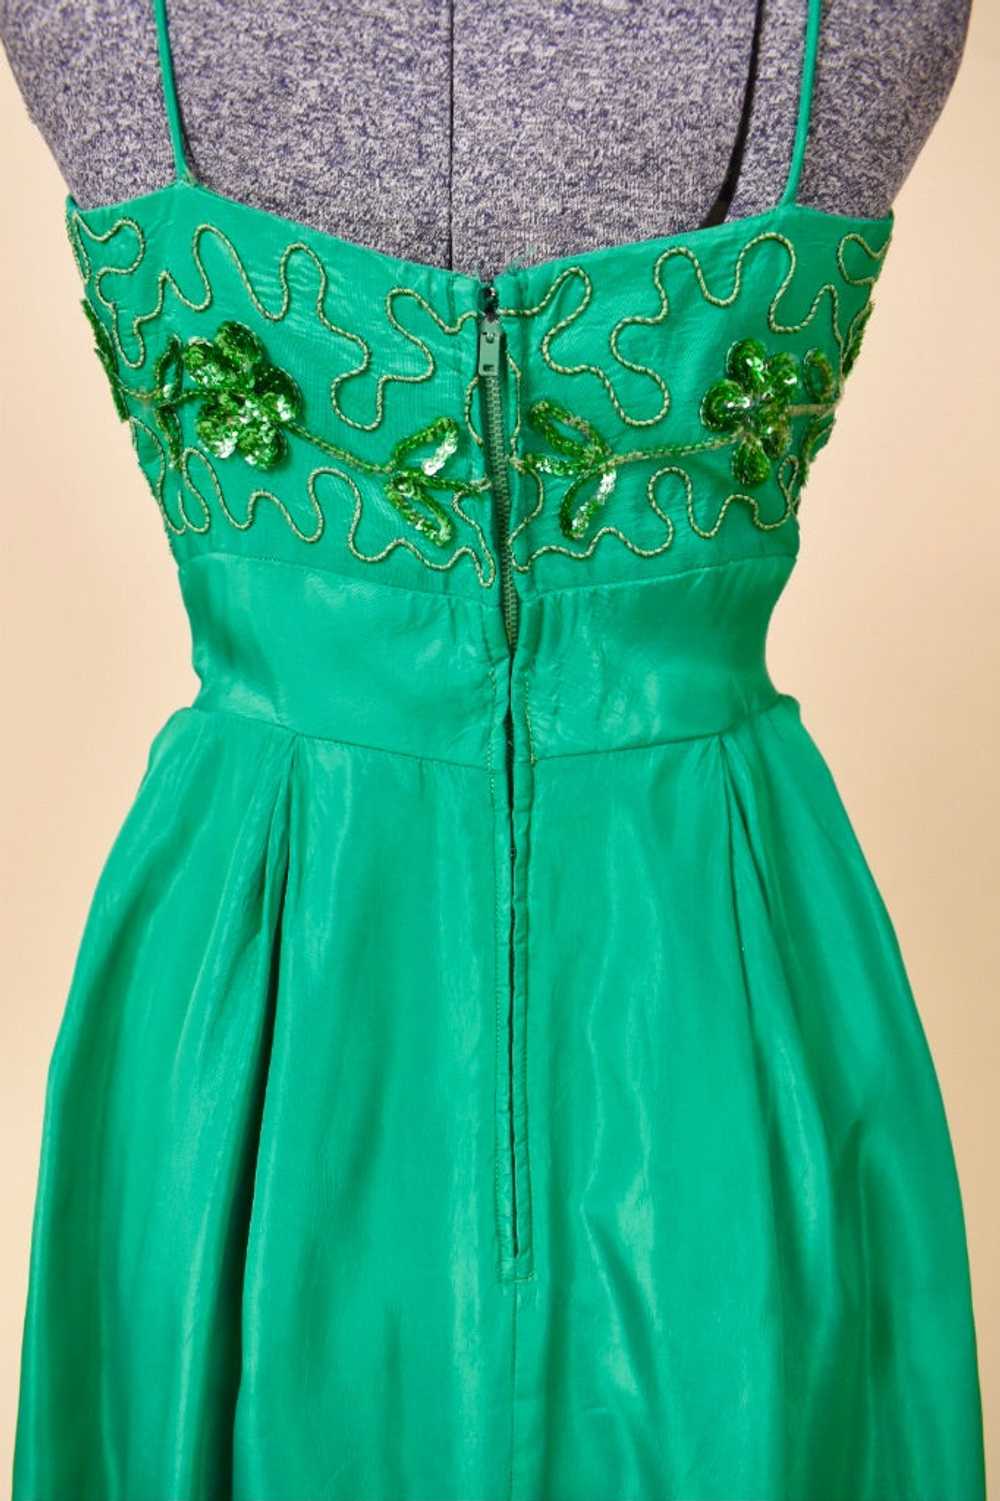 Green 60s Party Dress with Sequin Flowers, XS - image 6